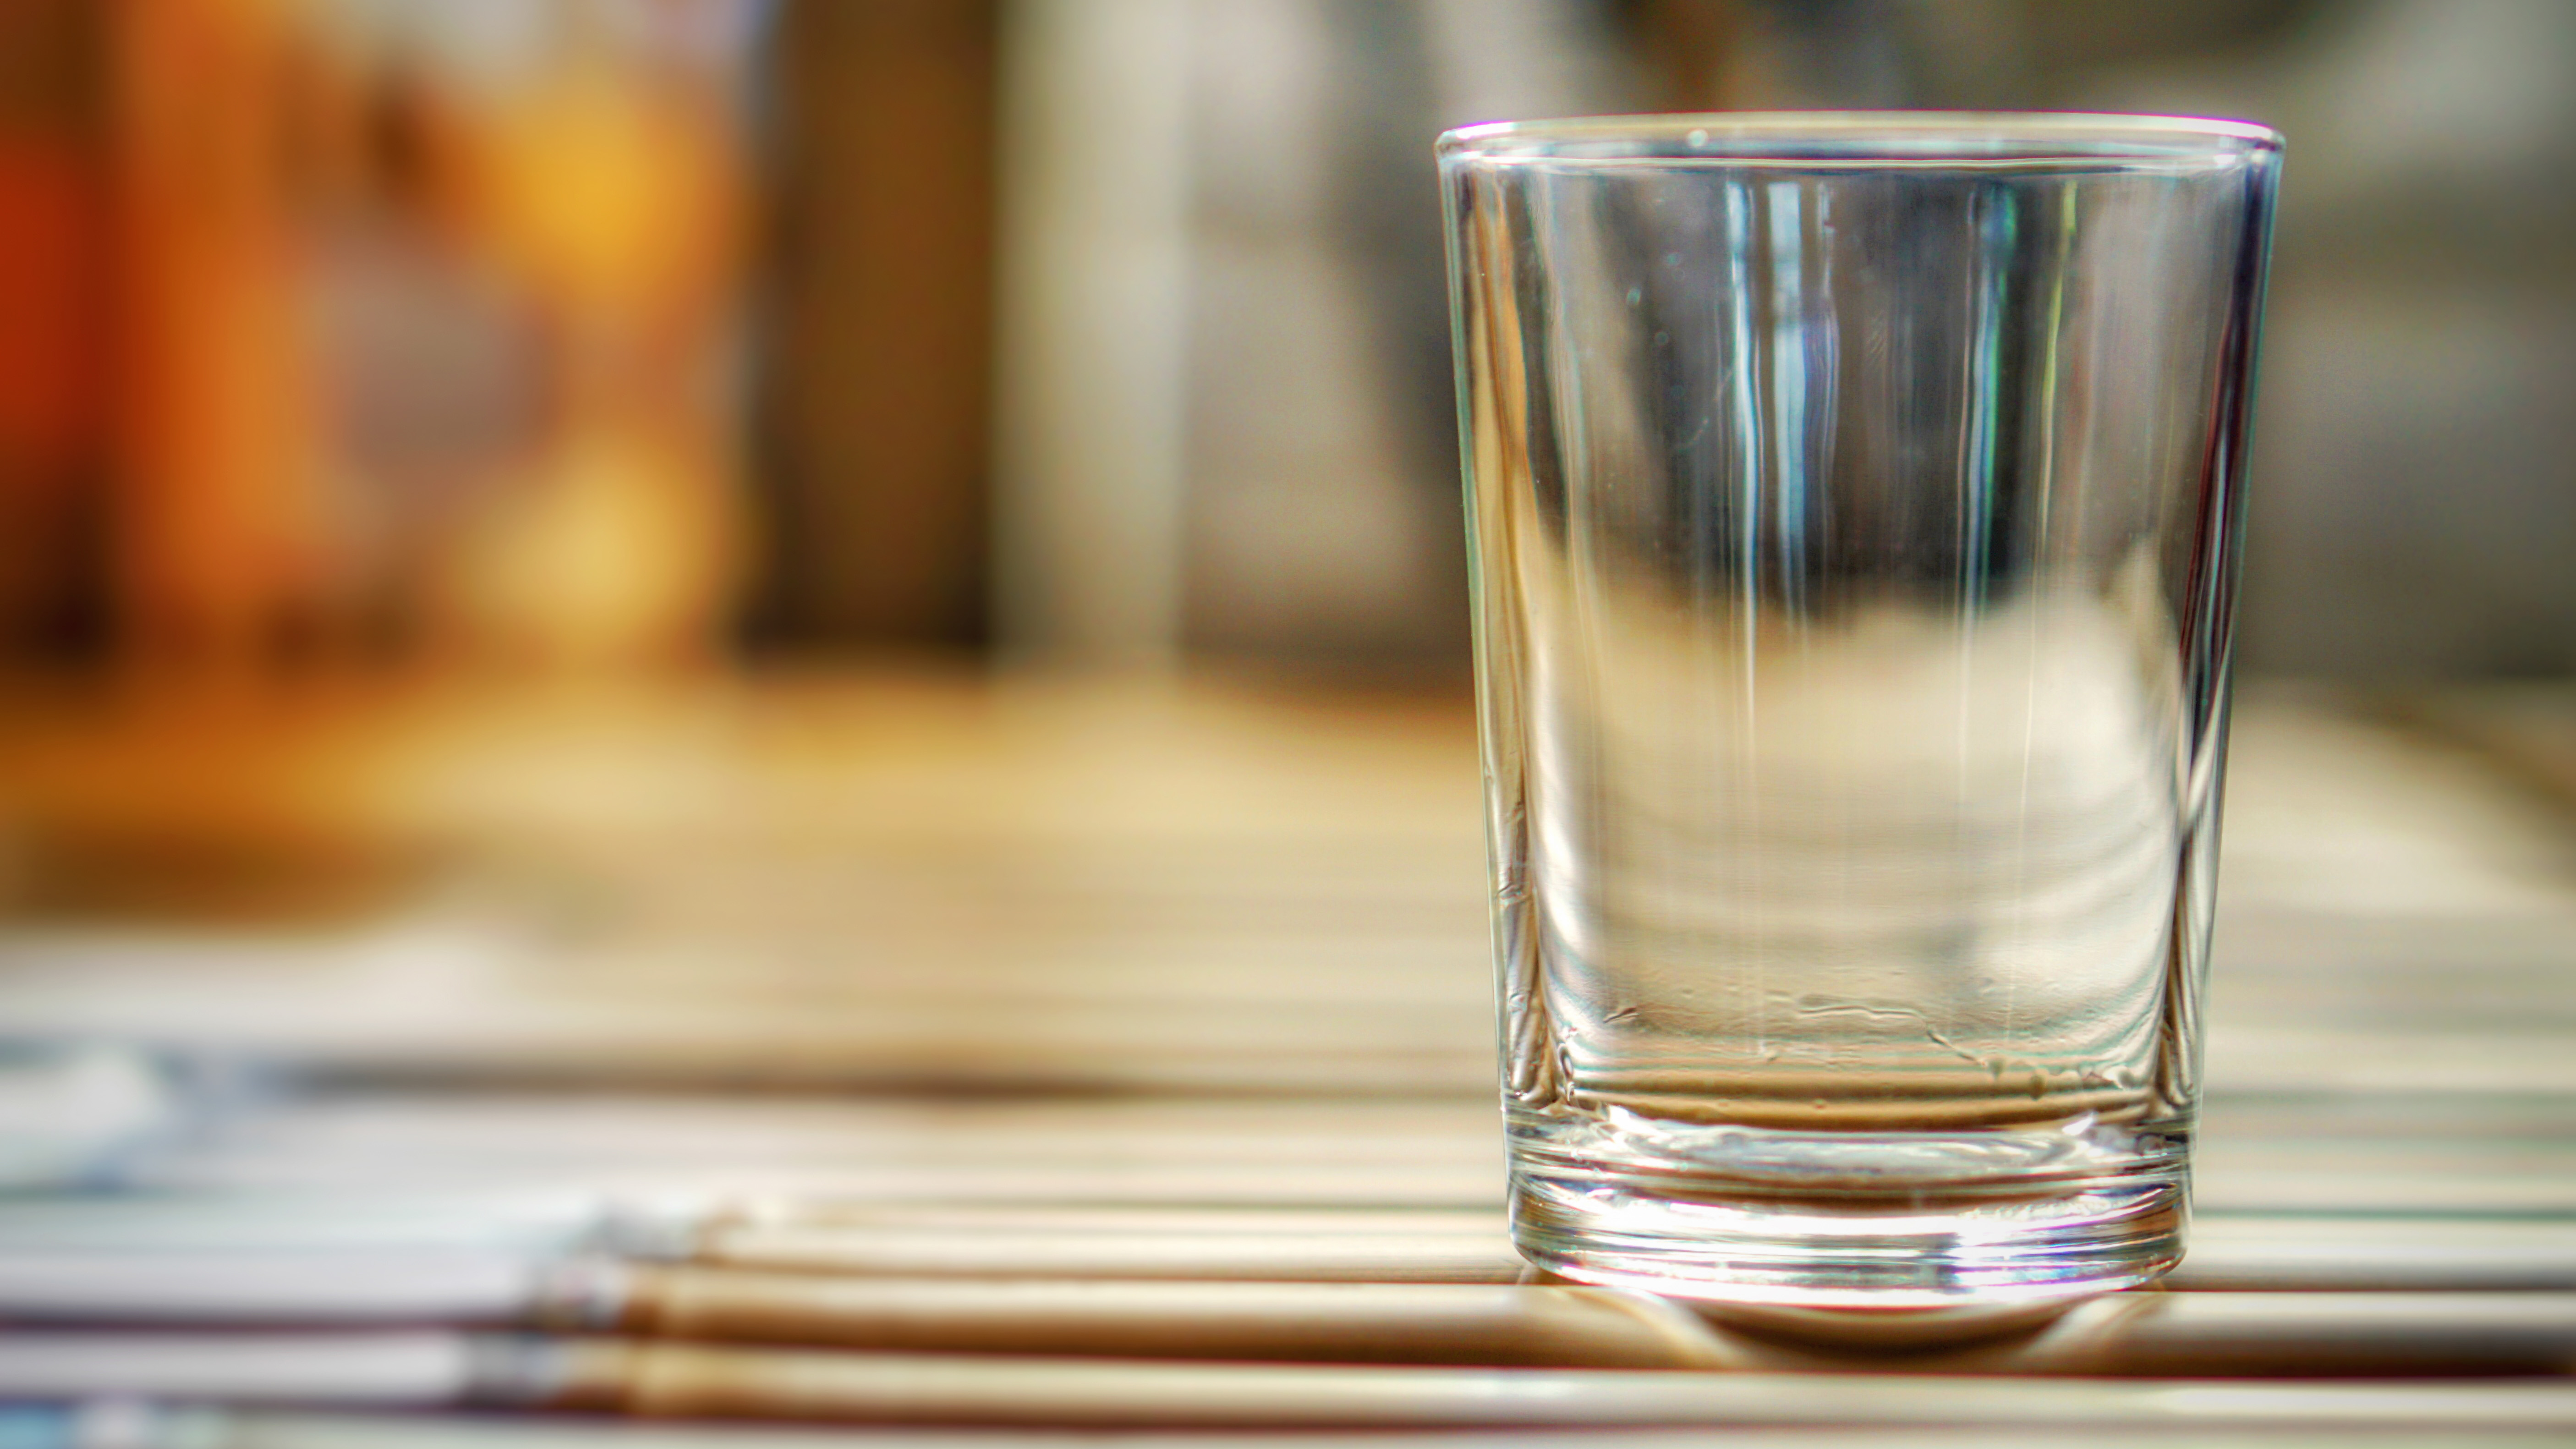 An empty and clean drinking glass sitting on a surface